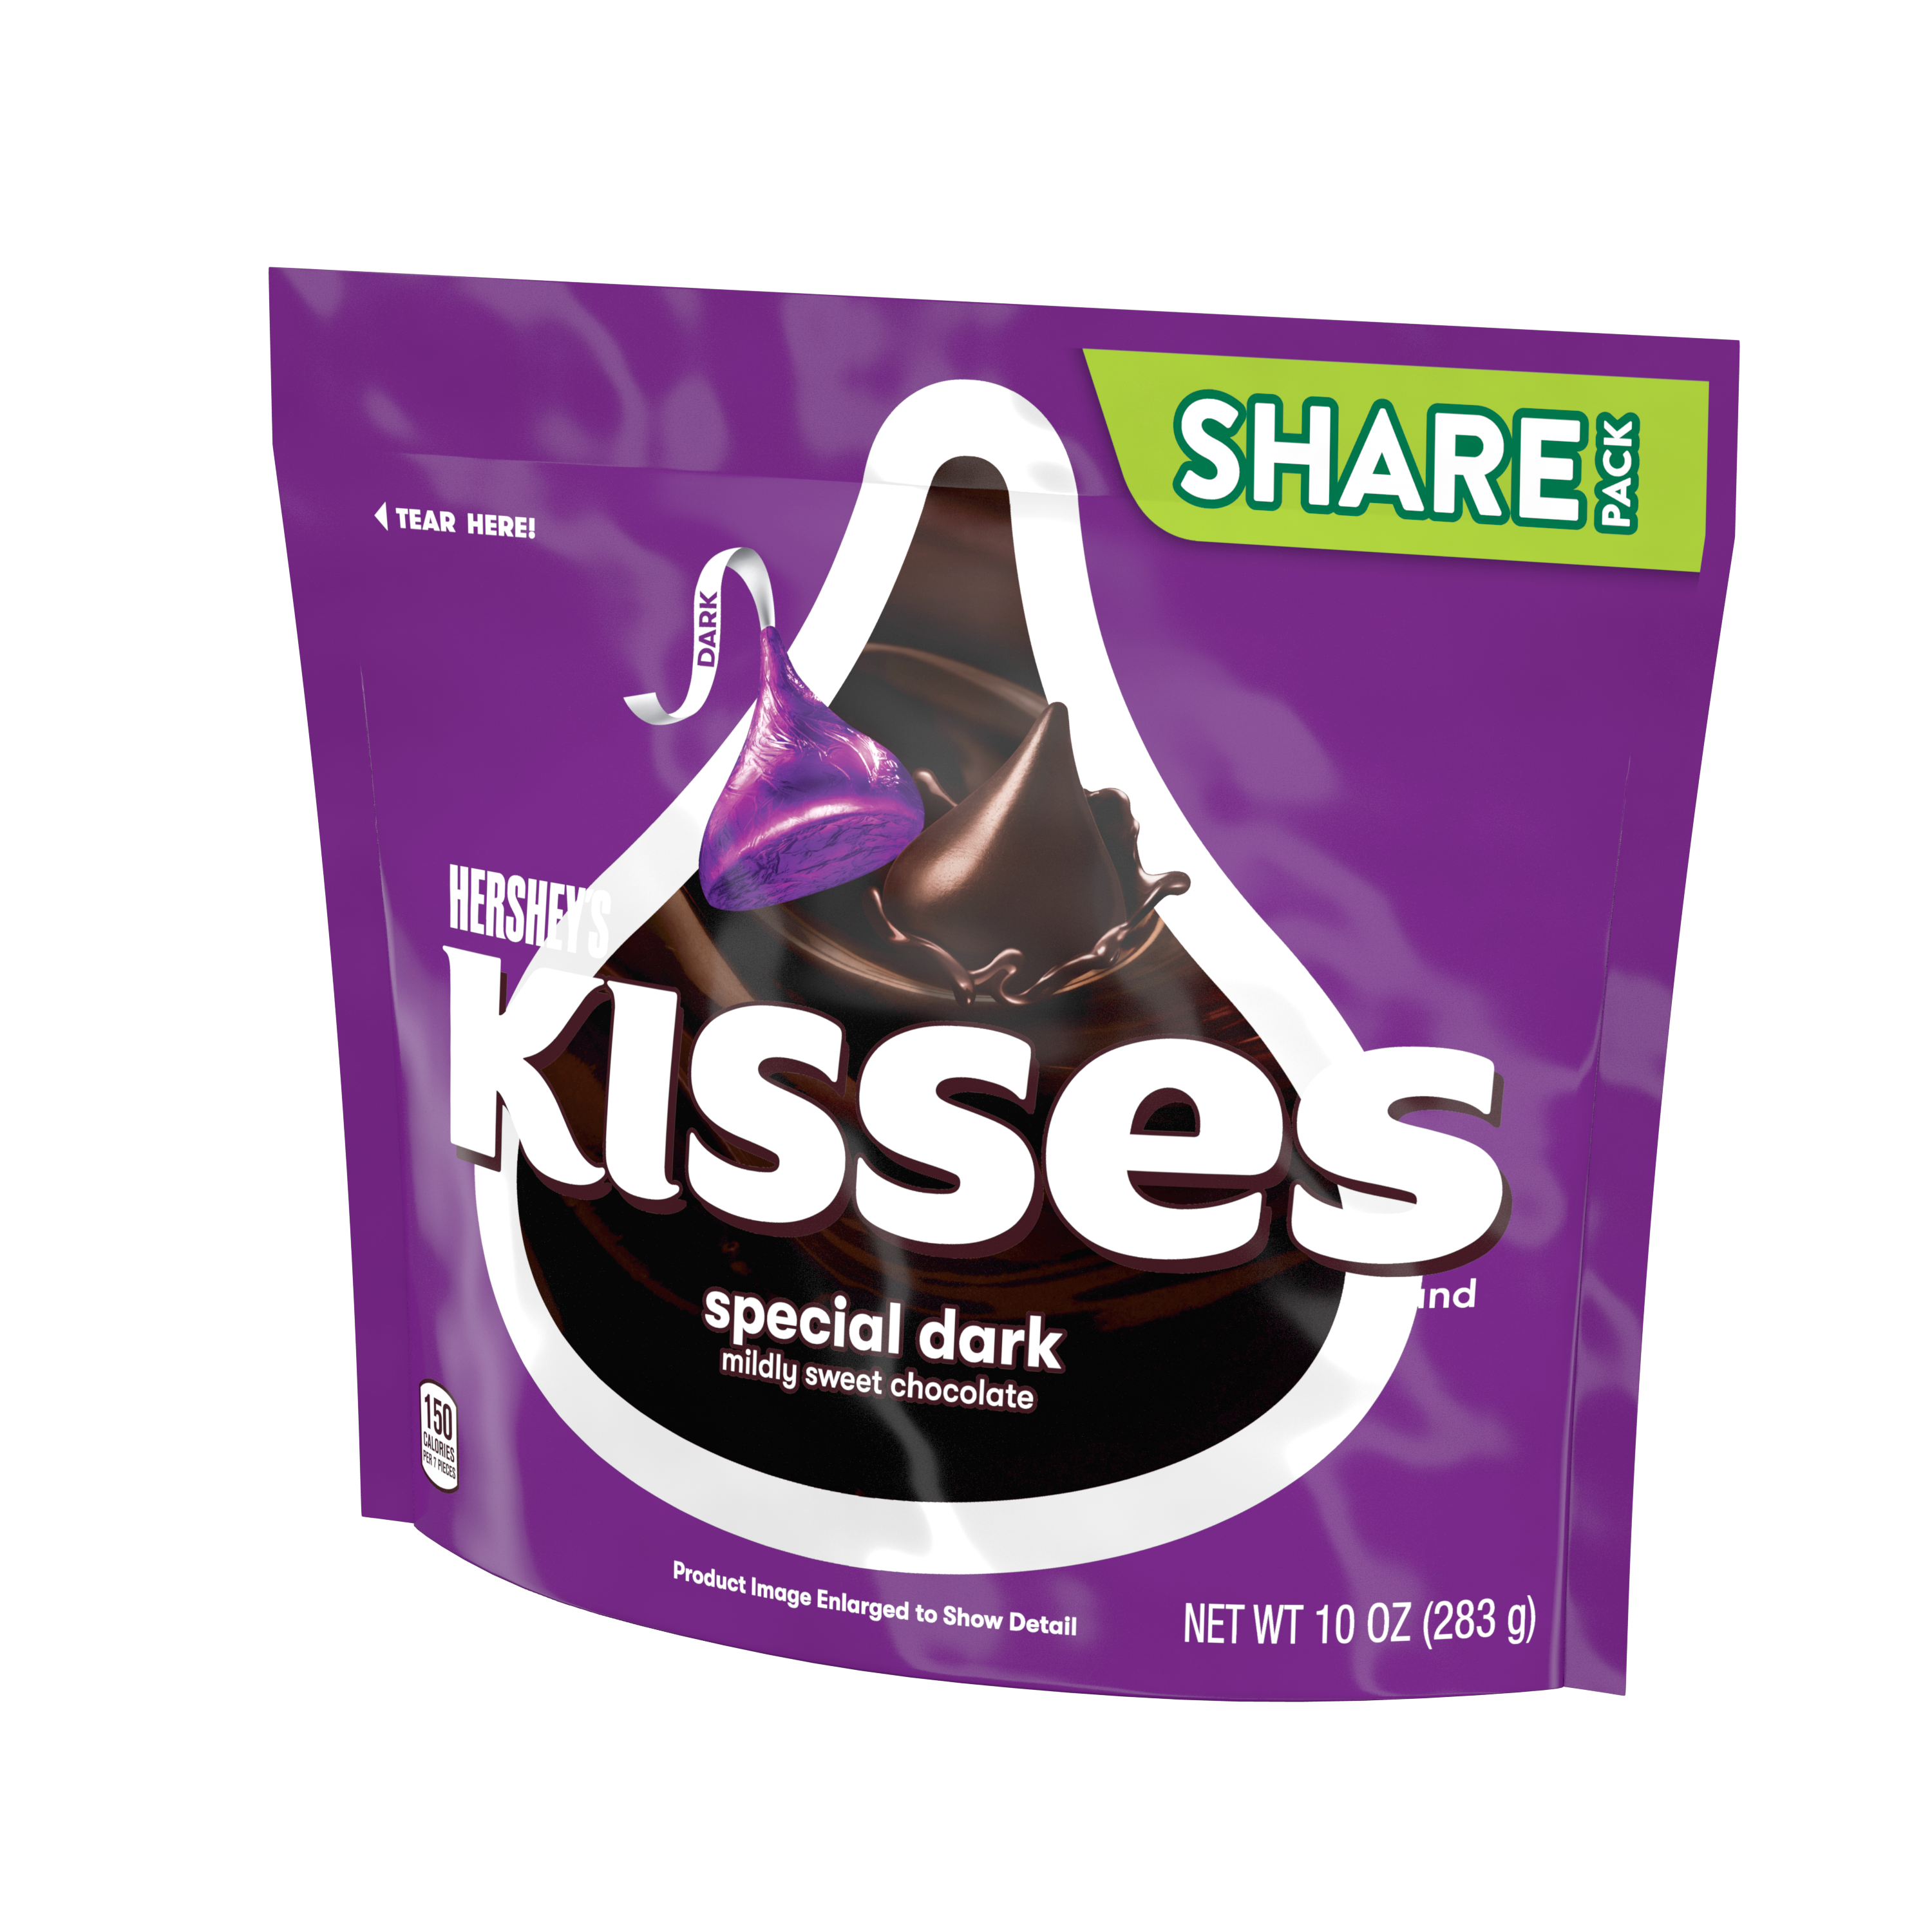 HERSHEY'S KISSES Special Dark Mildly Sweet Chocolate Candy, 10 oz pack - Right Side of Package